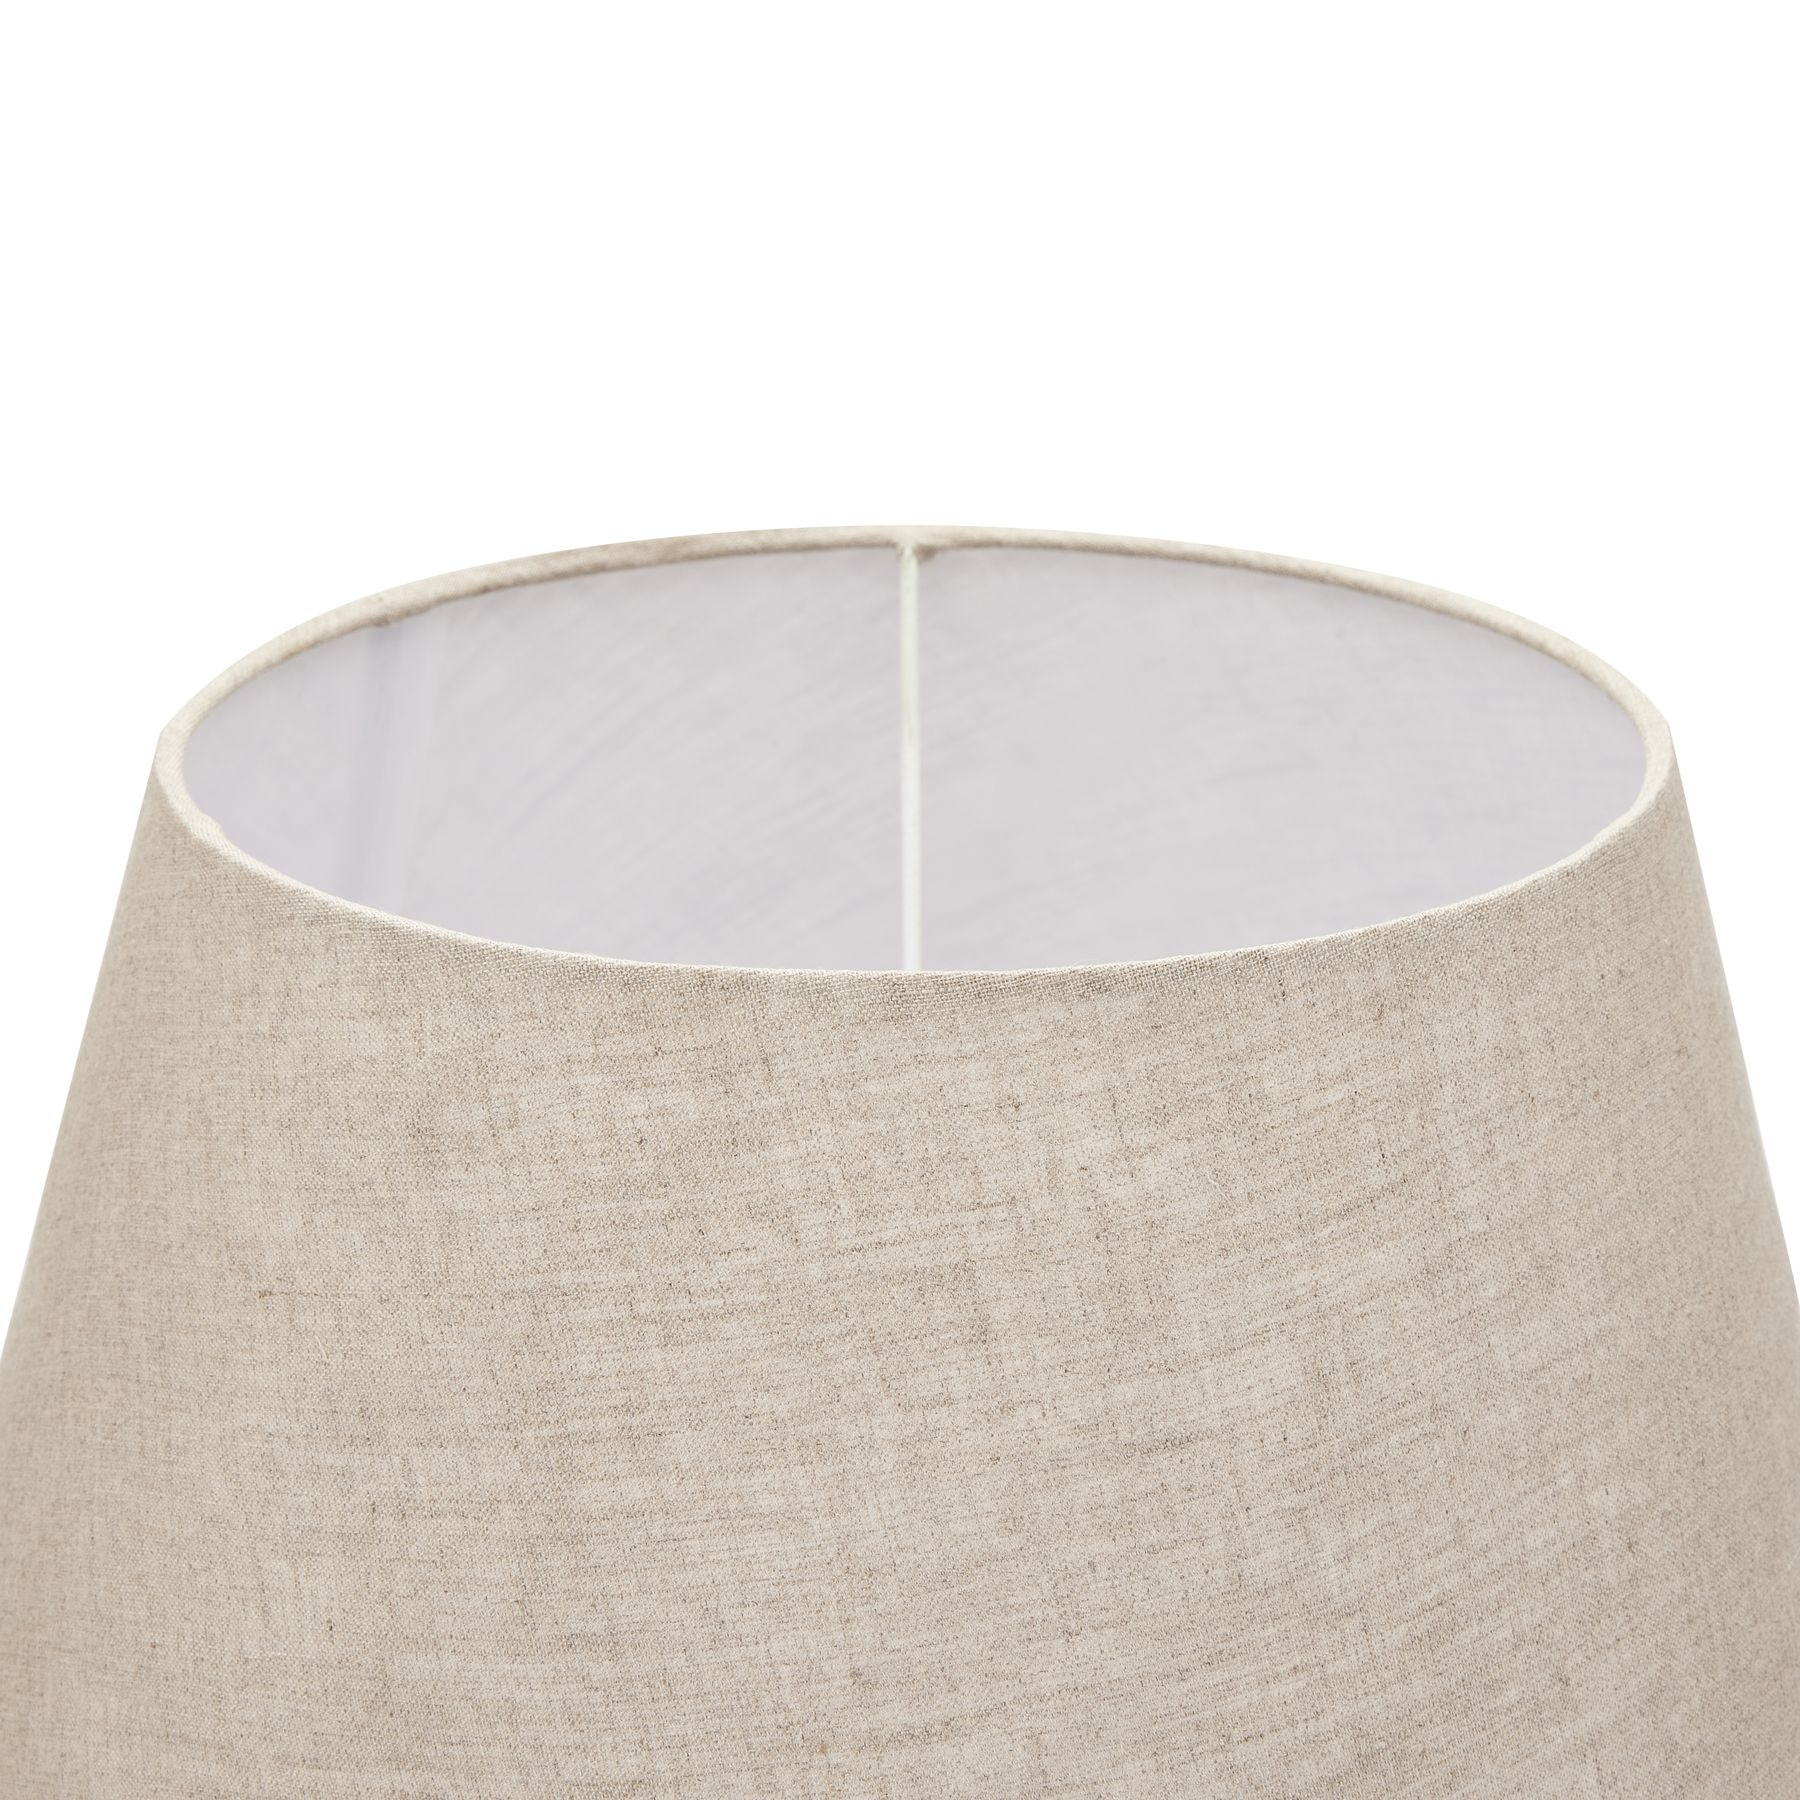 Delaney Natural Wash Spindle Lamp With Linen Shade - Image 3